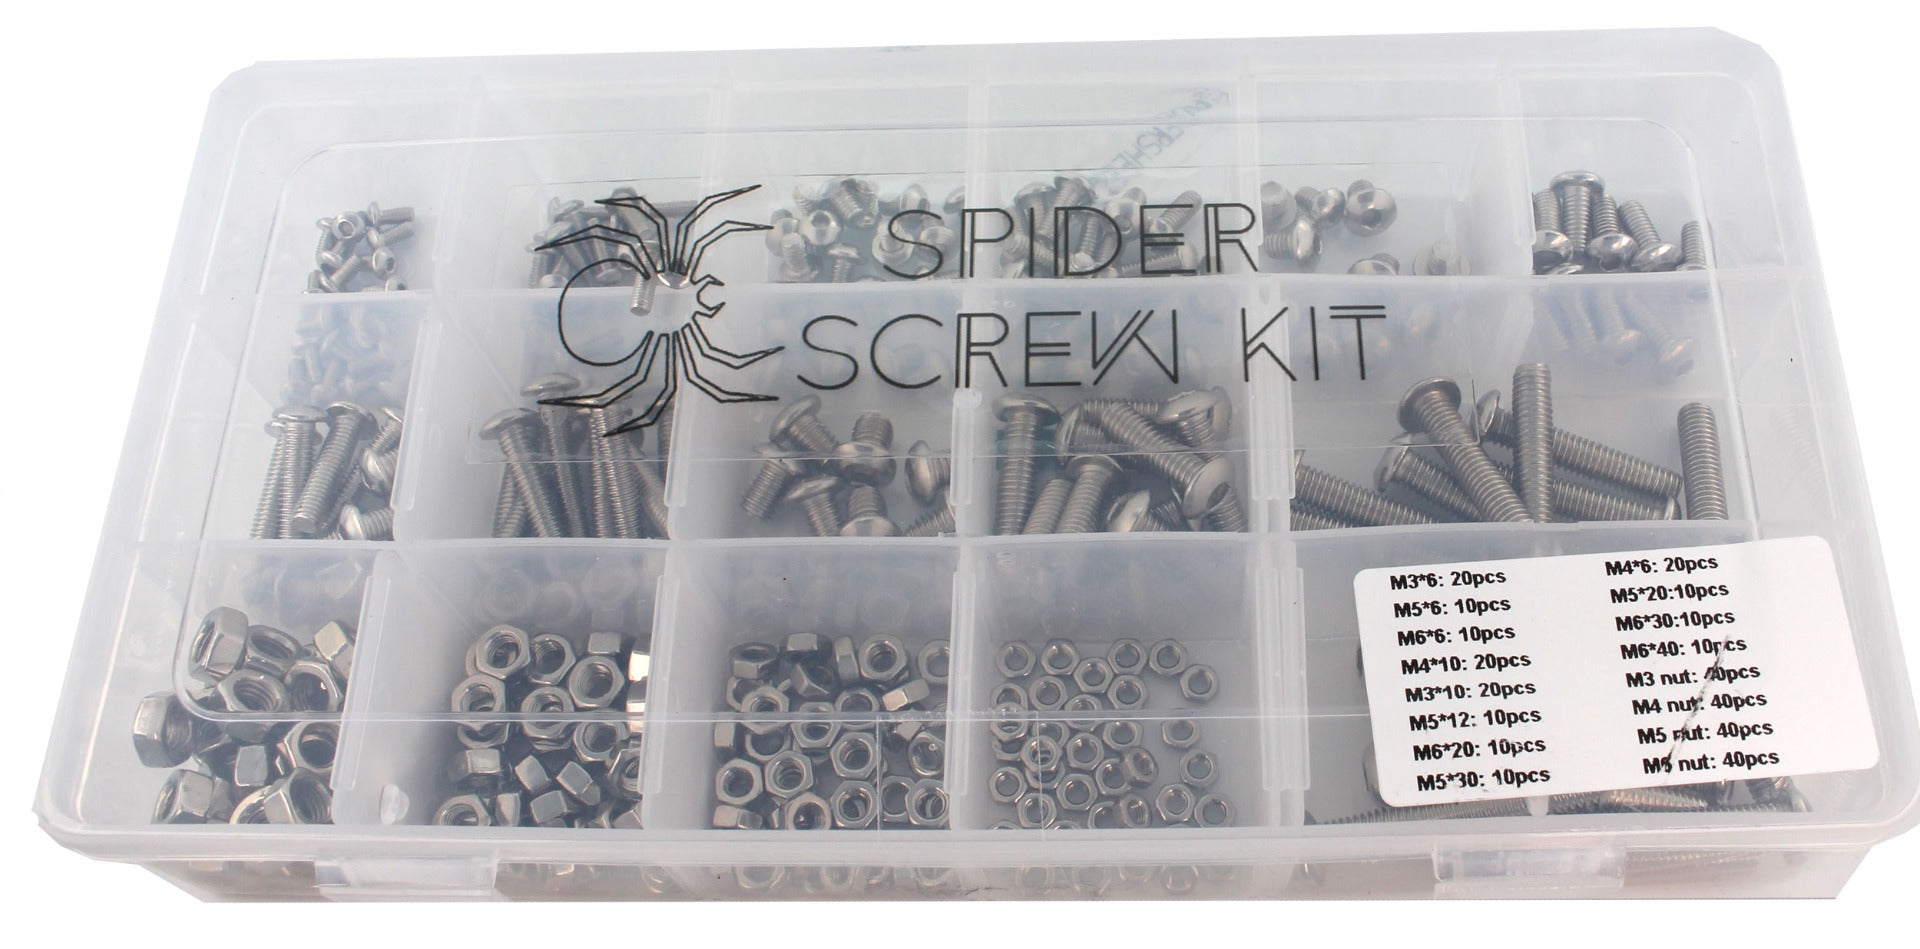 SpiderScrew Mixed Kit with Nuts - M3-M4-M5-M6 - 160 pcs